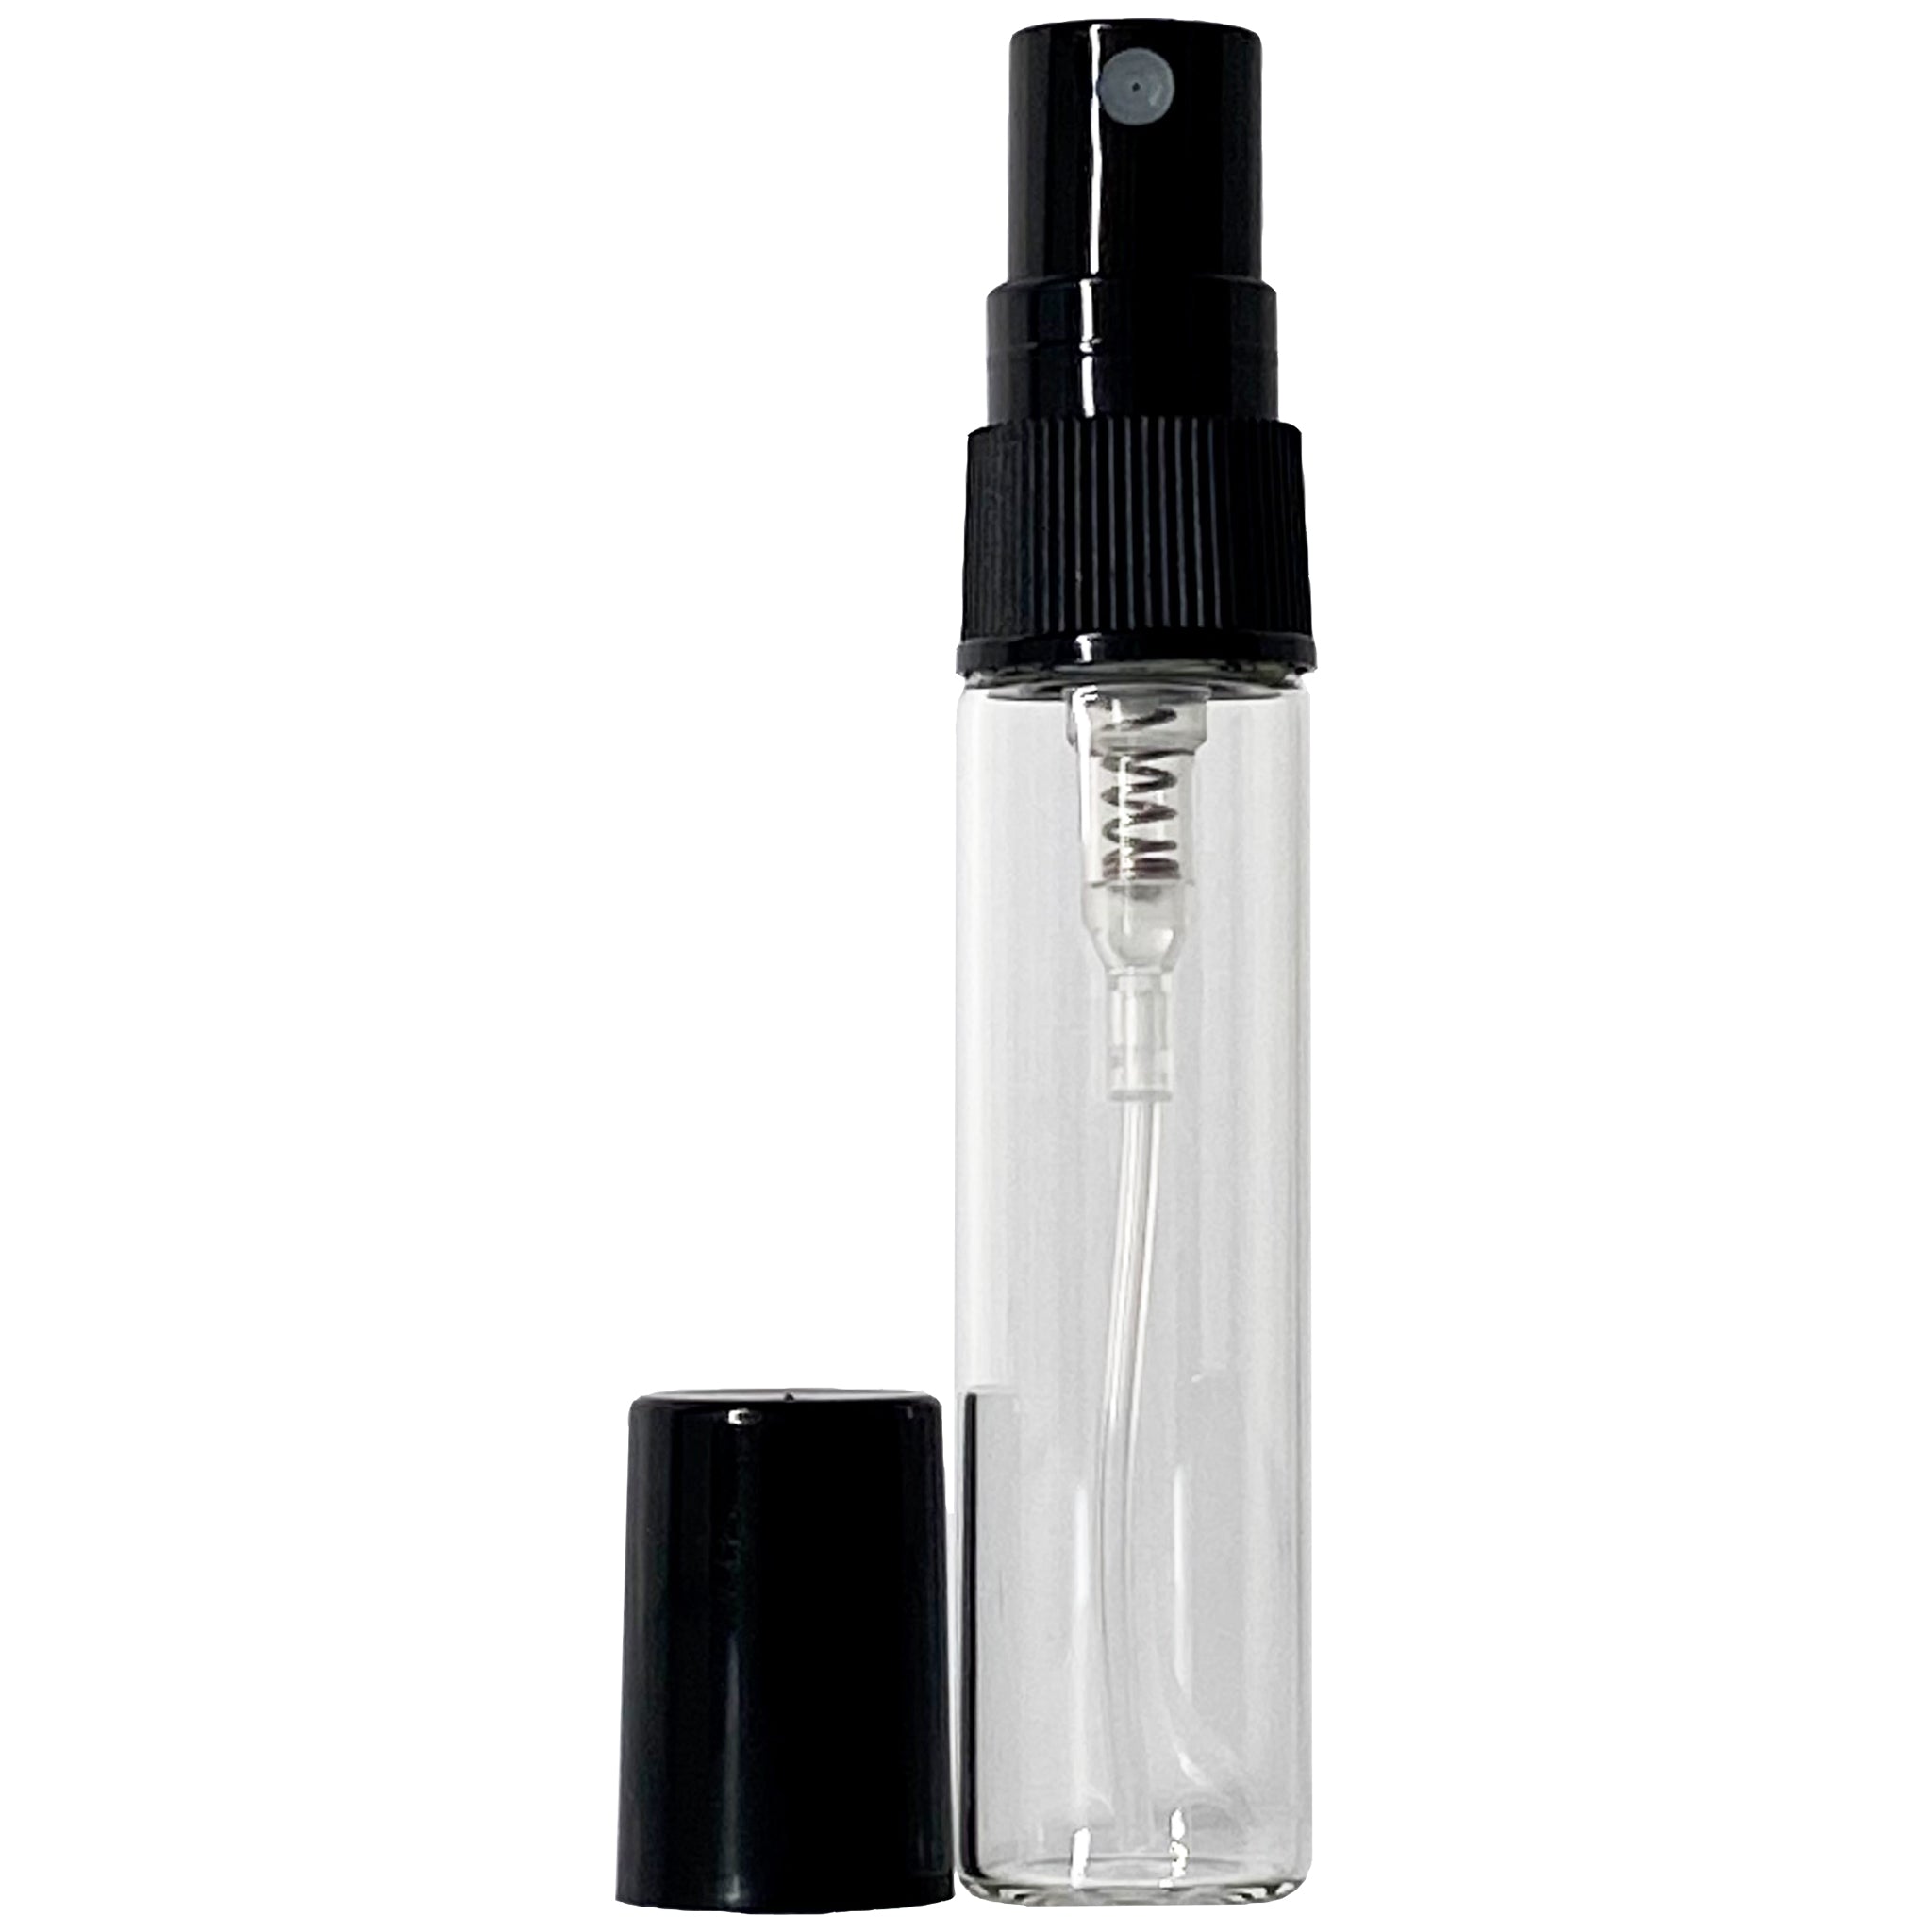 100pcs/lot 5ml Thin Glass Spray Bottle with Scale Empty Perfume Travel  Atomizer Cosmetic Container Sample Vials